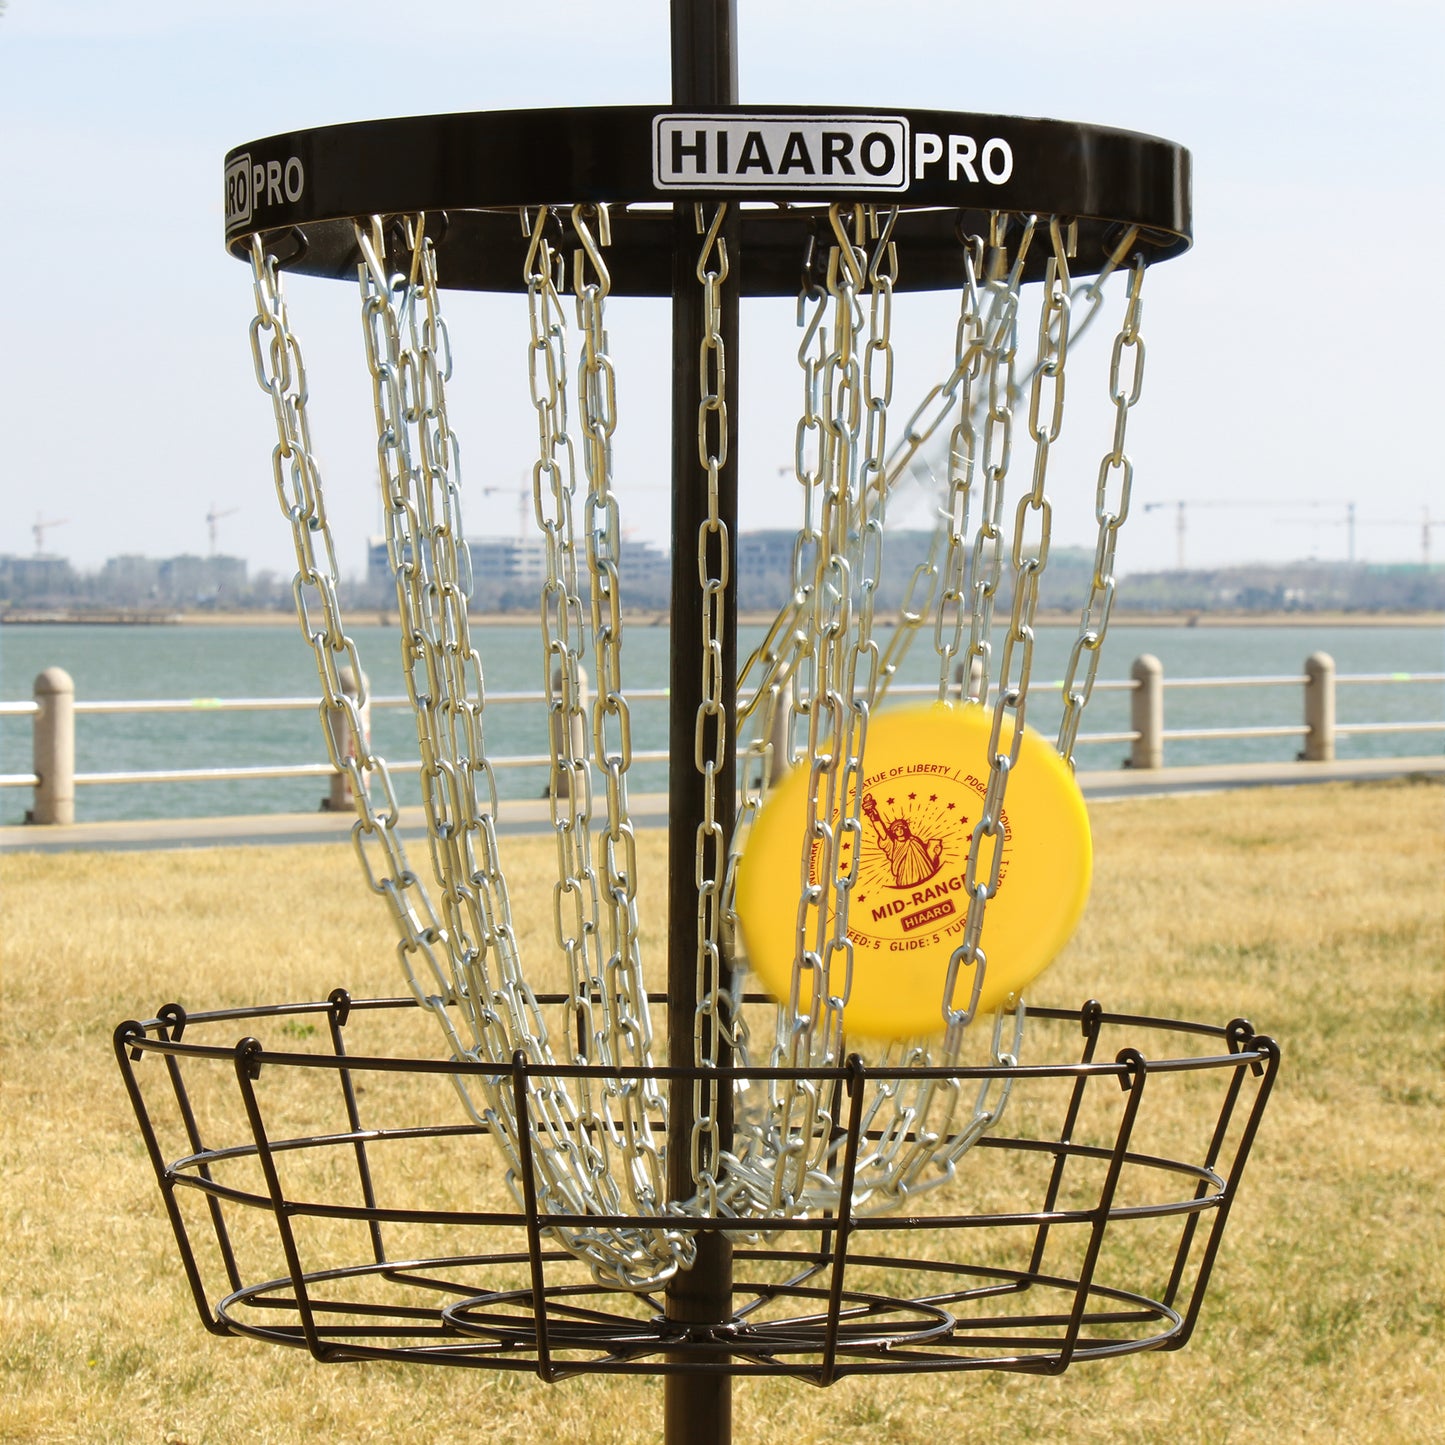 【PDGA Approved】 PRO Disc Golf Basket, Portable Disc Golf Target with Heavy Duty 24 Chains, Professional Frisbee Golf Basket Set